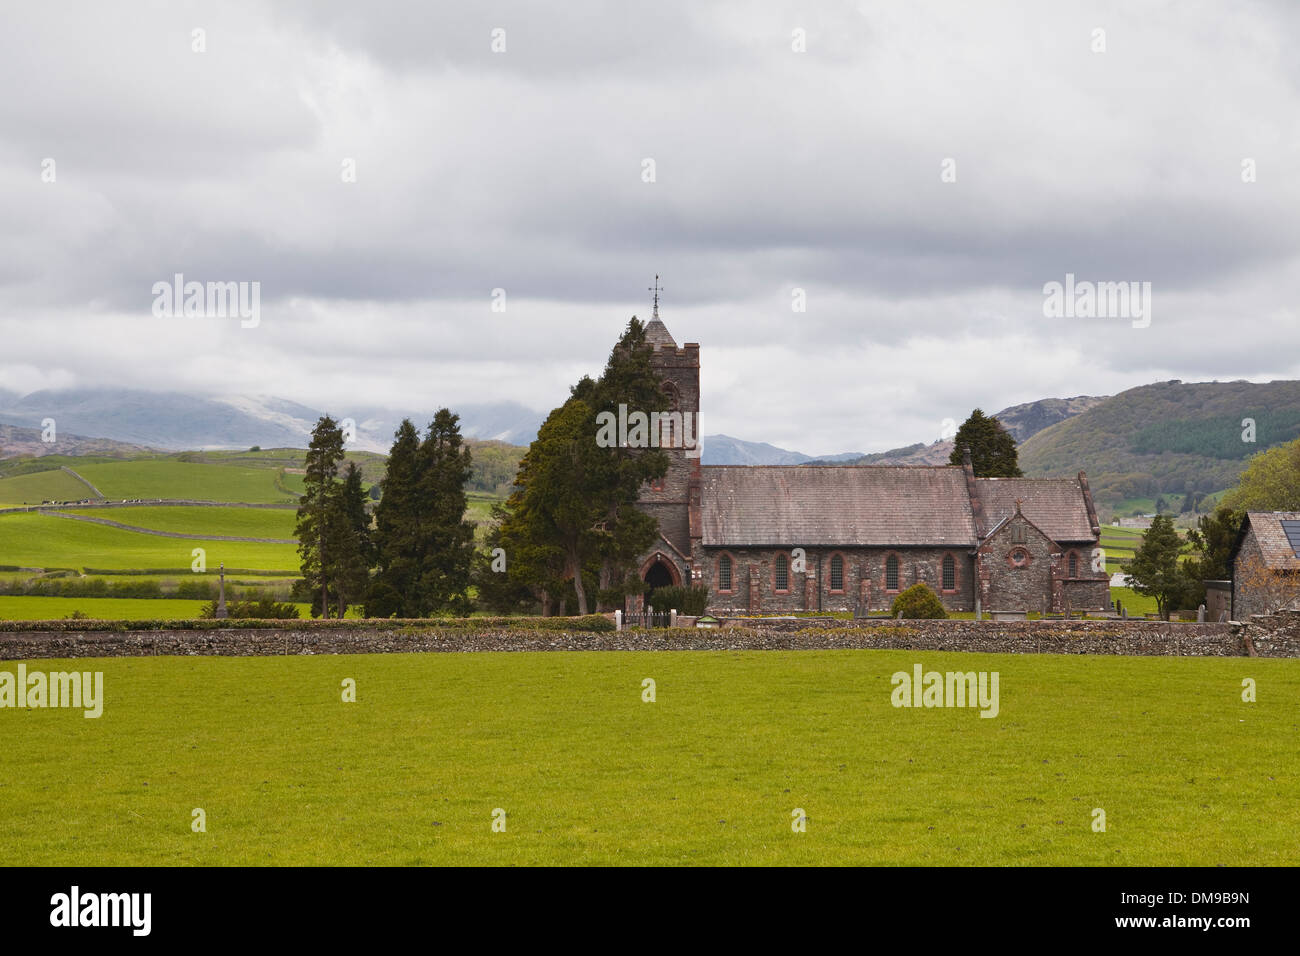 St Luke's church in the village of Lowick. The church is in the Lake District national park, England. Stock Photo